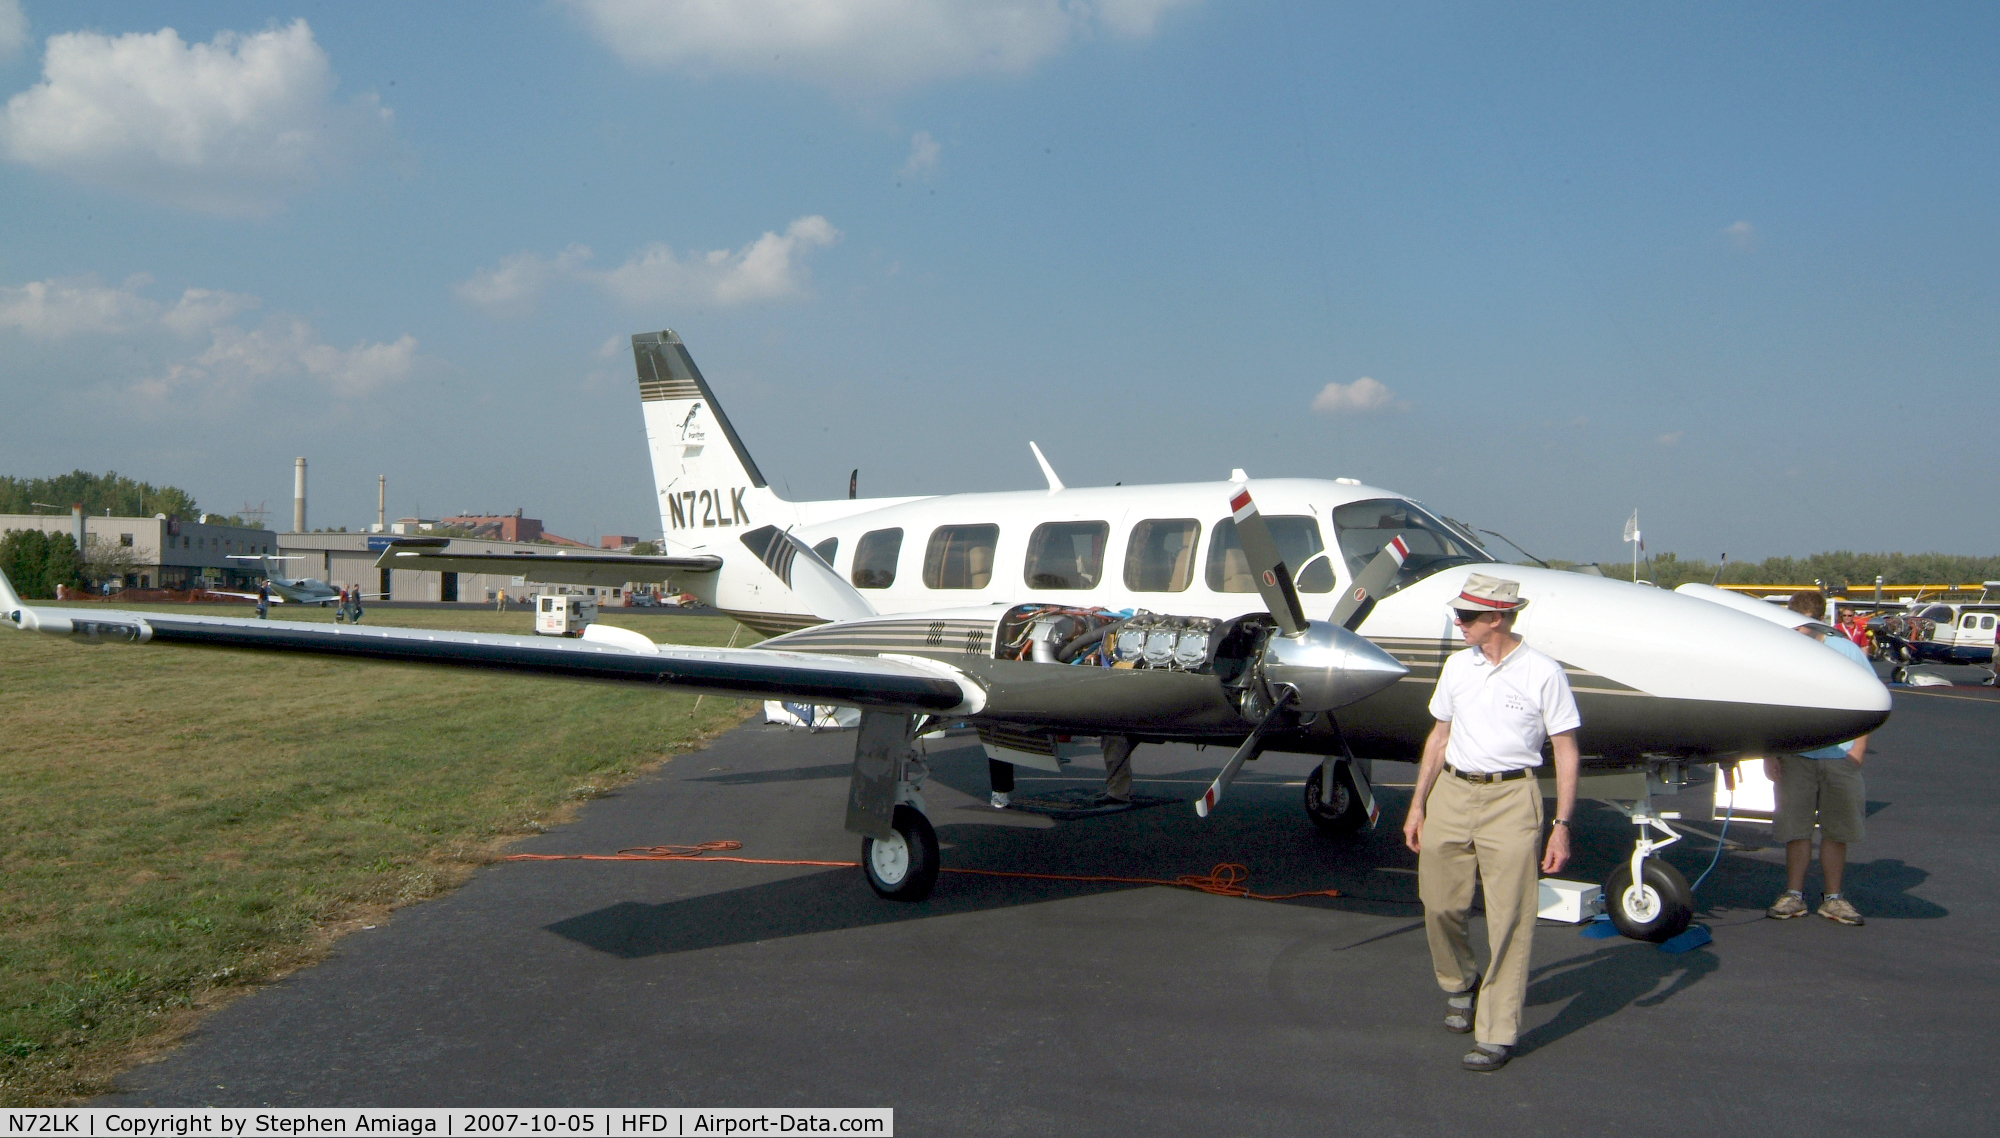 N72LK, Piper PA-31-350 Chieftain C/N 31-8352004, At the AOPA Expo...